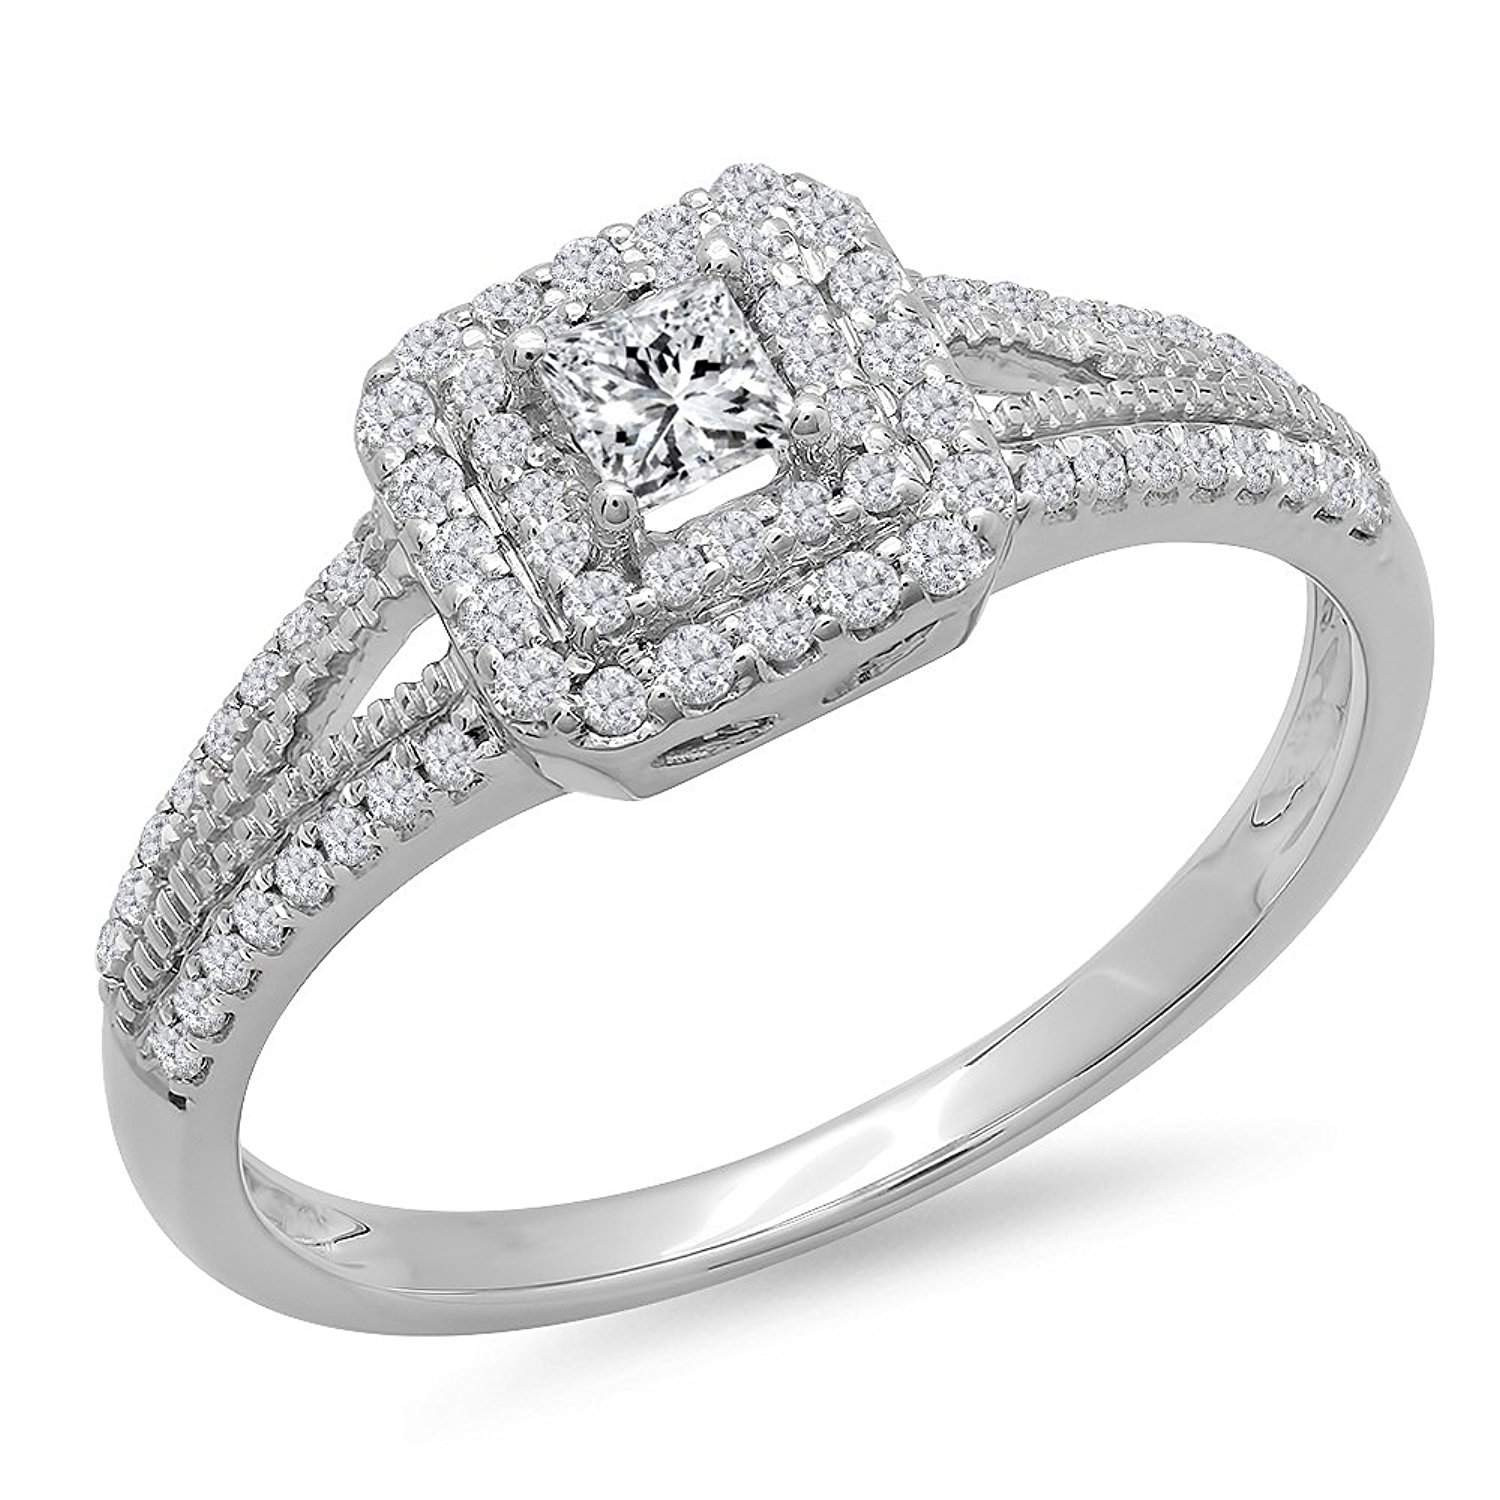 Cheap Womens Wedding Rings
 Top 10 Best Valentine’s Day Deals on Engagement Rings